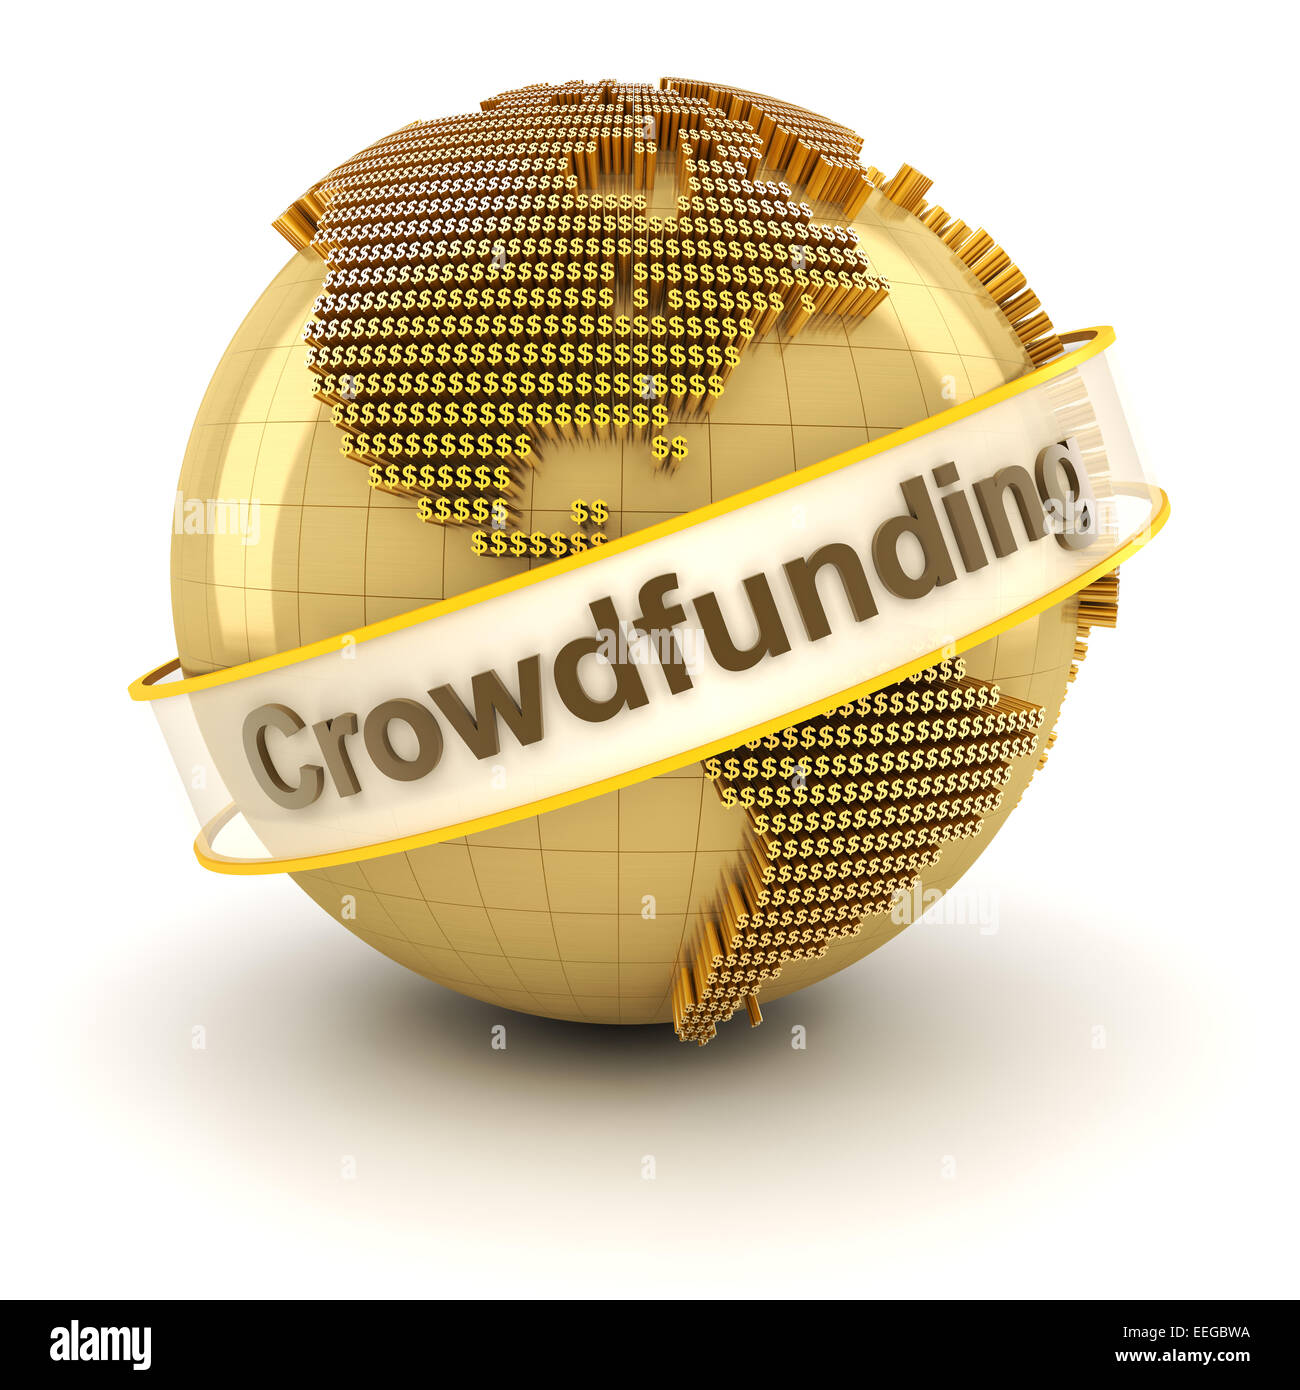 Crowdfunding symbol with globe formed by dollar signs, 3d render Stock Photo